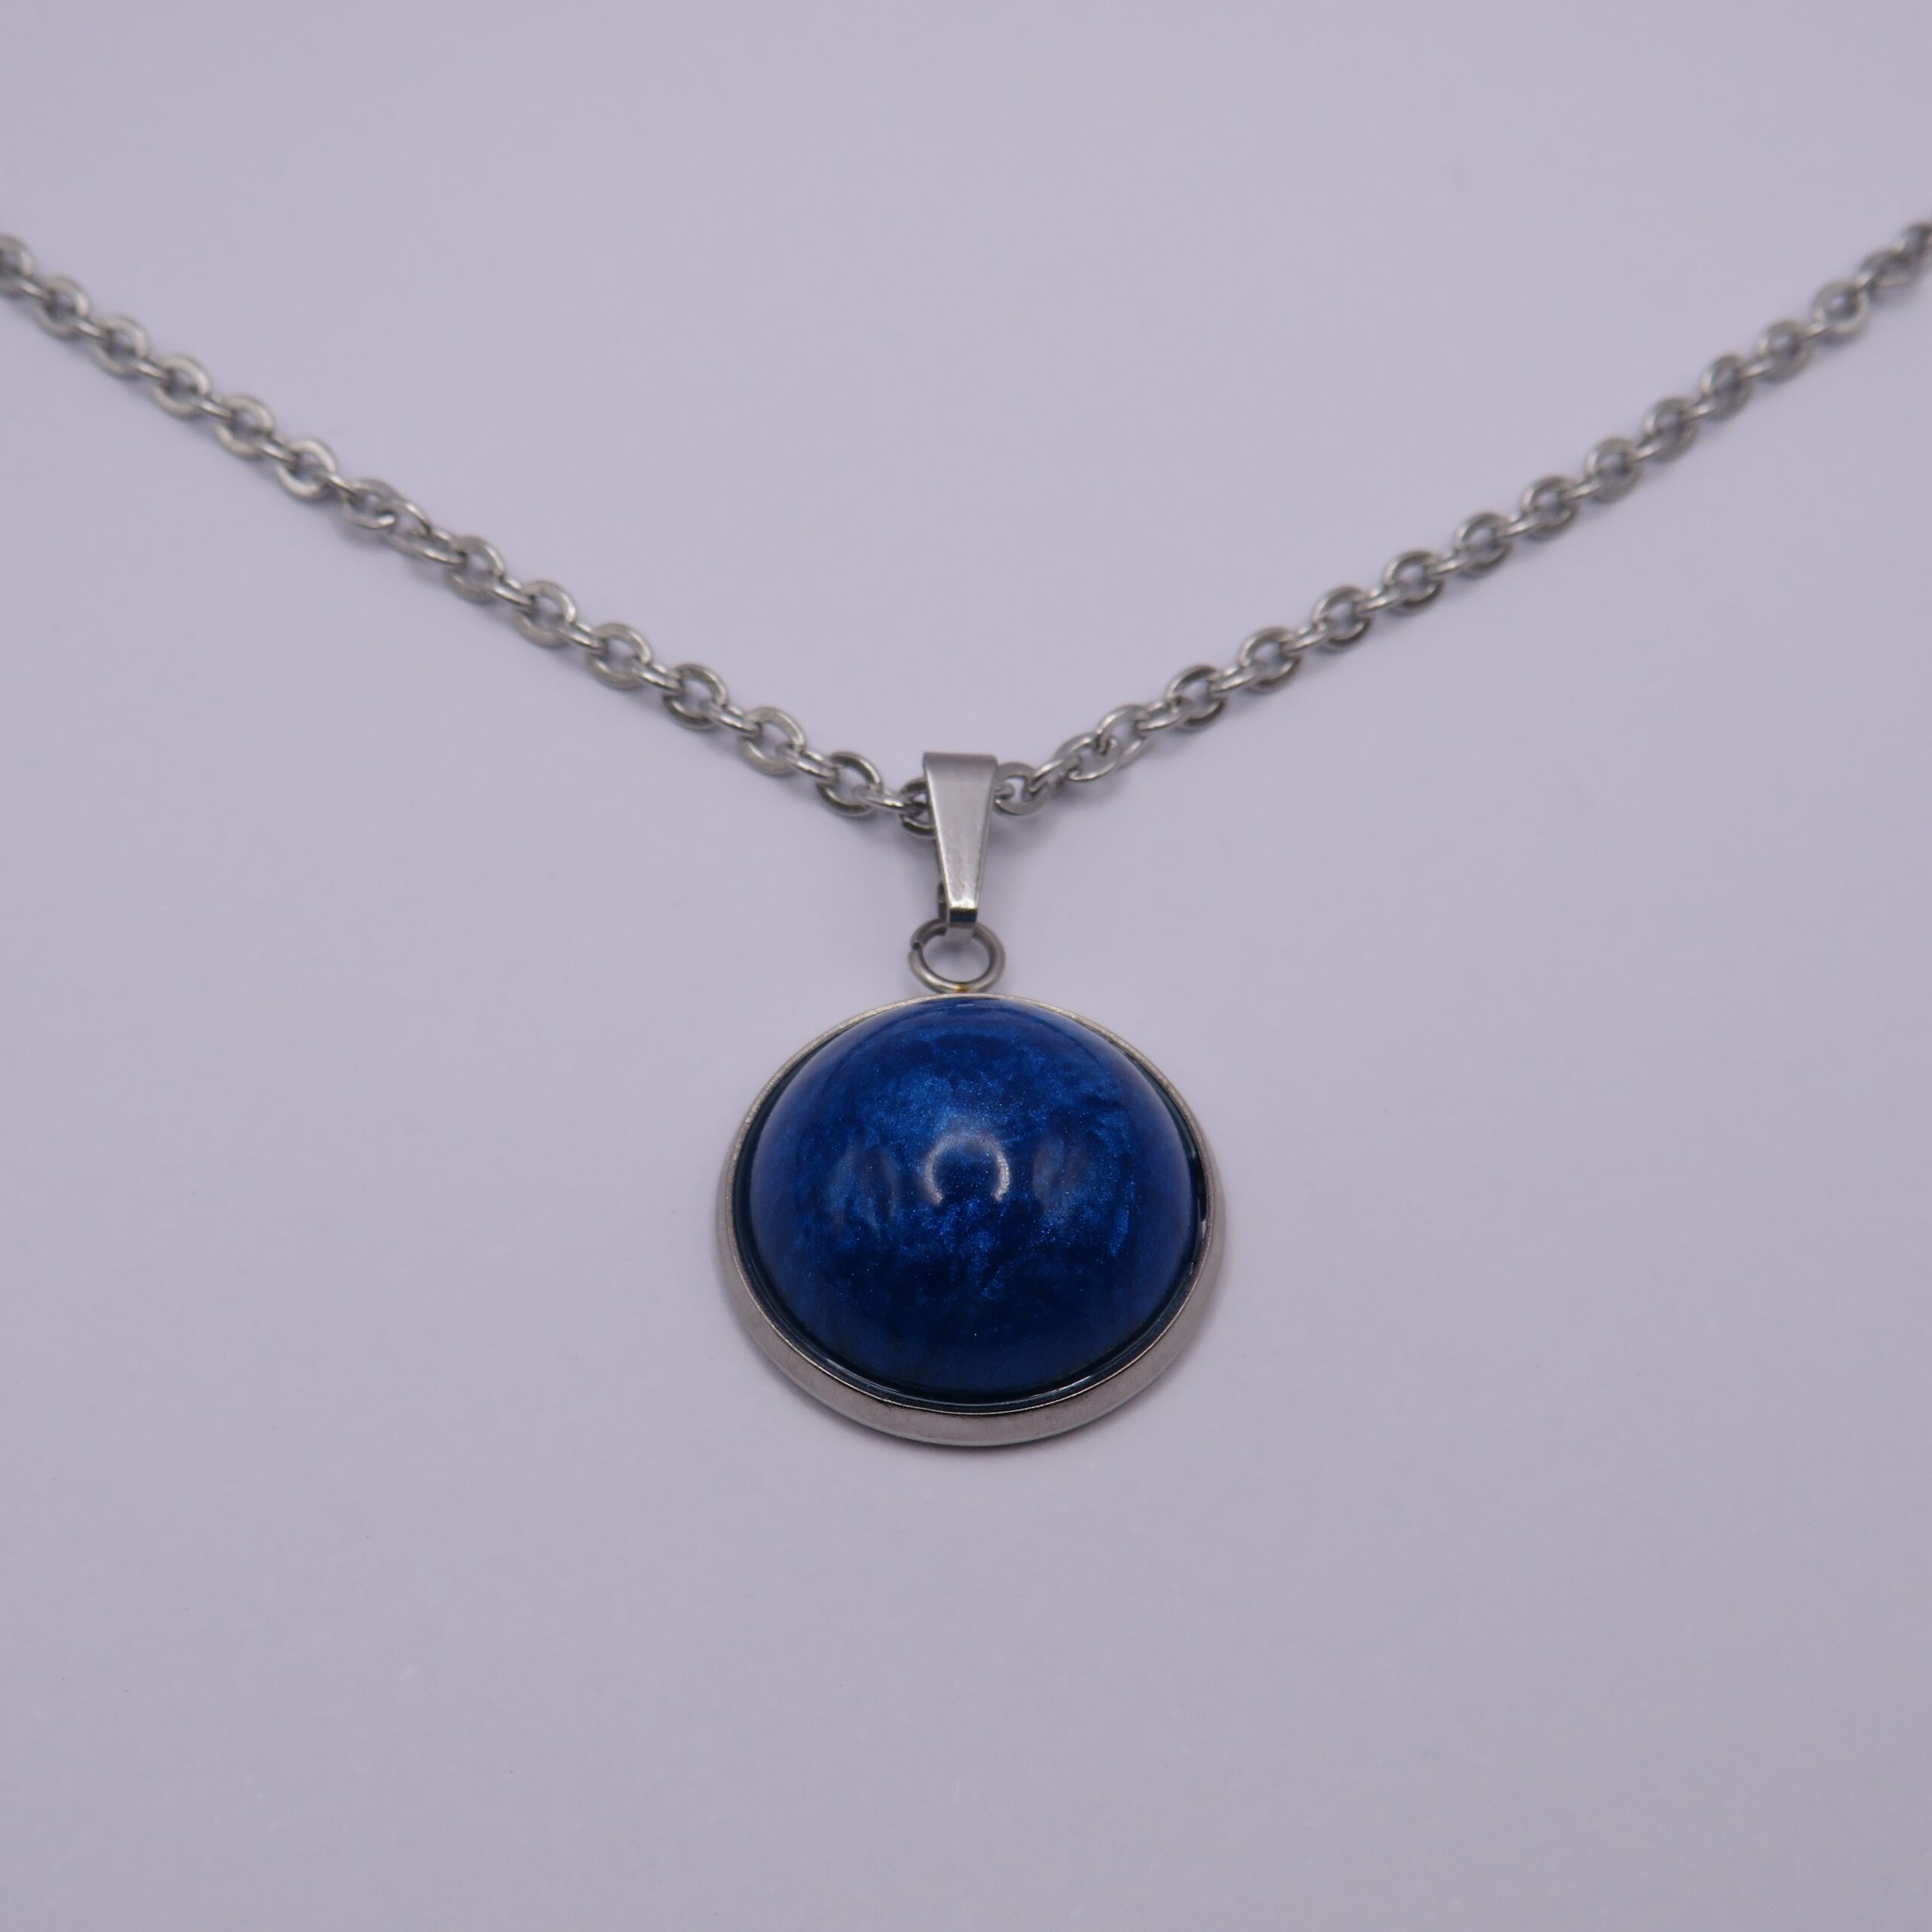 Stainless Steel Blue Cabochon Pendant Necklace